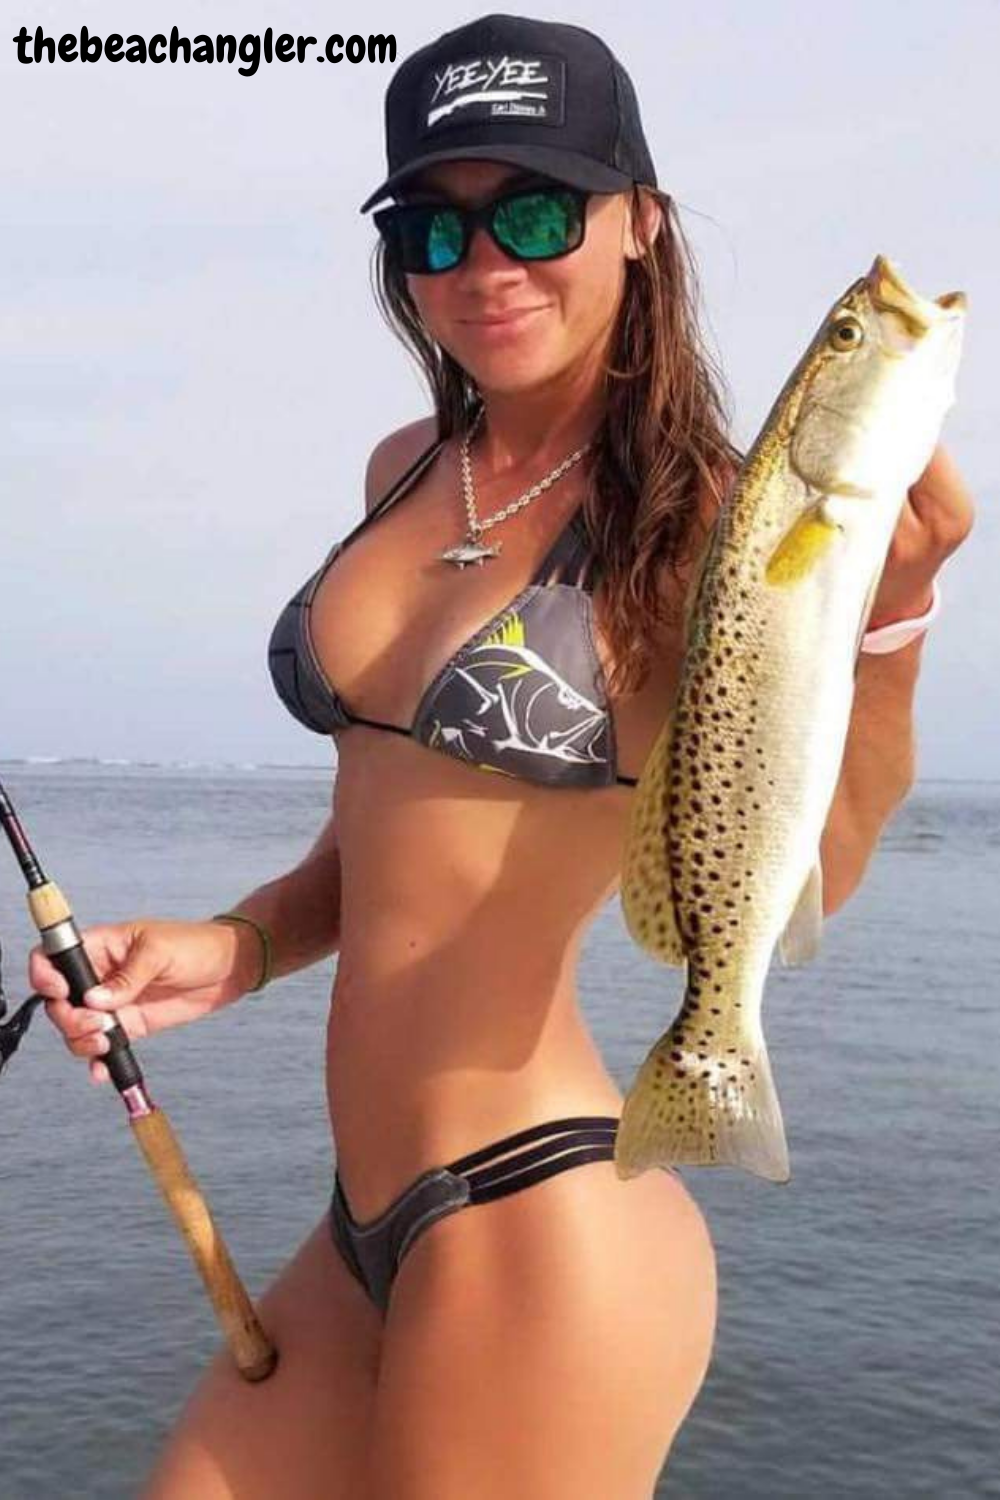 Young lady with a nice surf caught speckled trout.